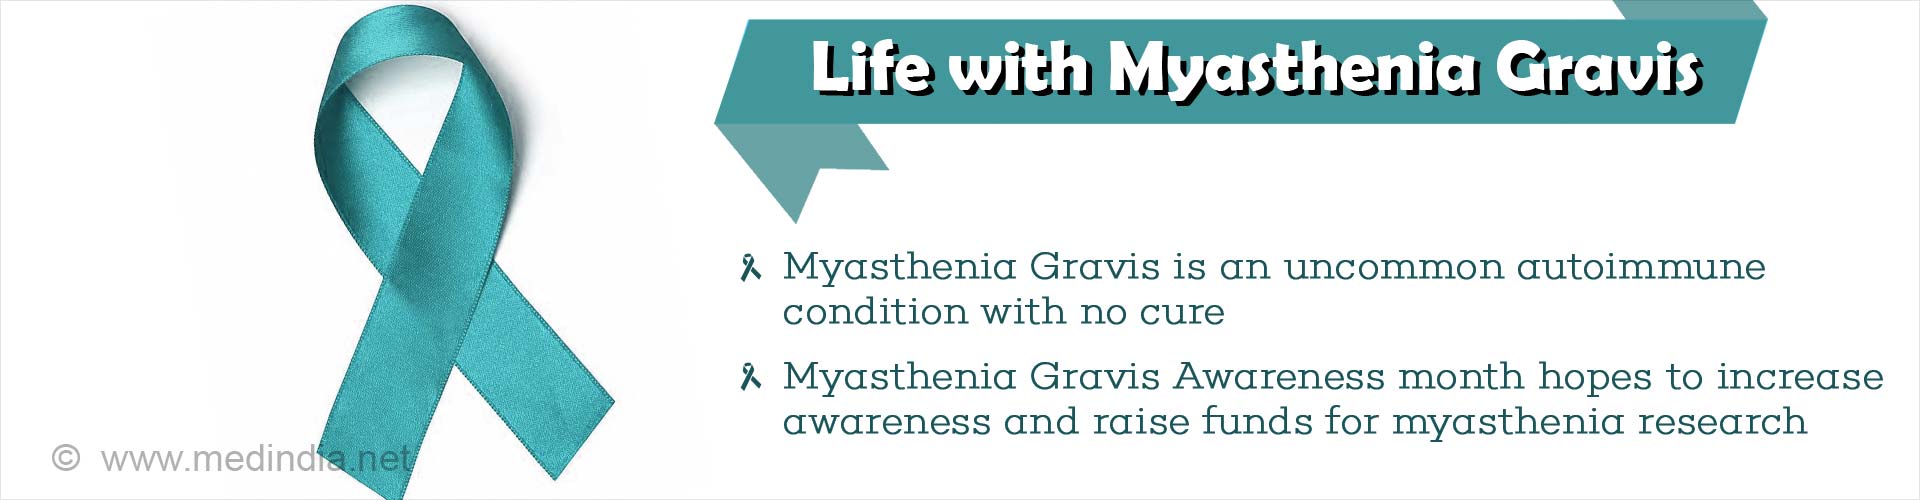 Life with Myasthenia Gravis
- Myasthenia Gravis is an uncommon autoimmune condition with no cure
- Myasthenia Gravis Awareness month hopes to increase awareness and raise funds for ayasthenia research